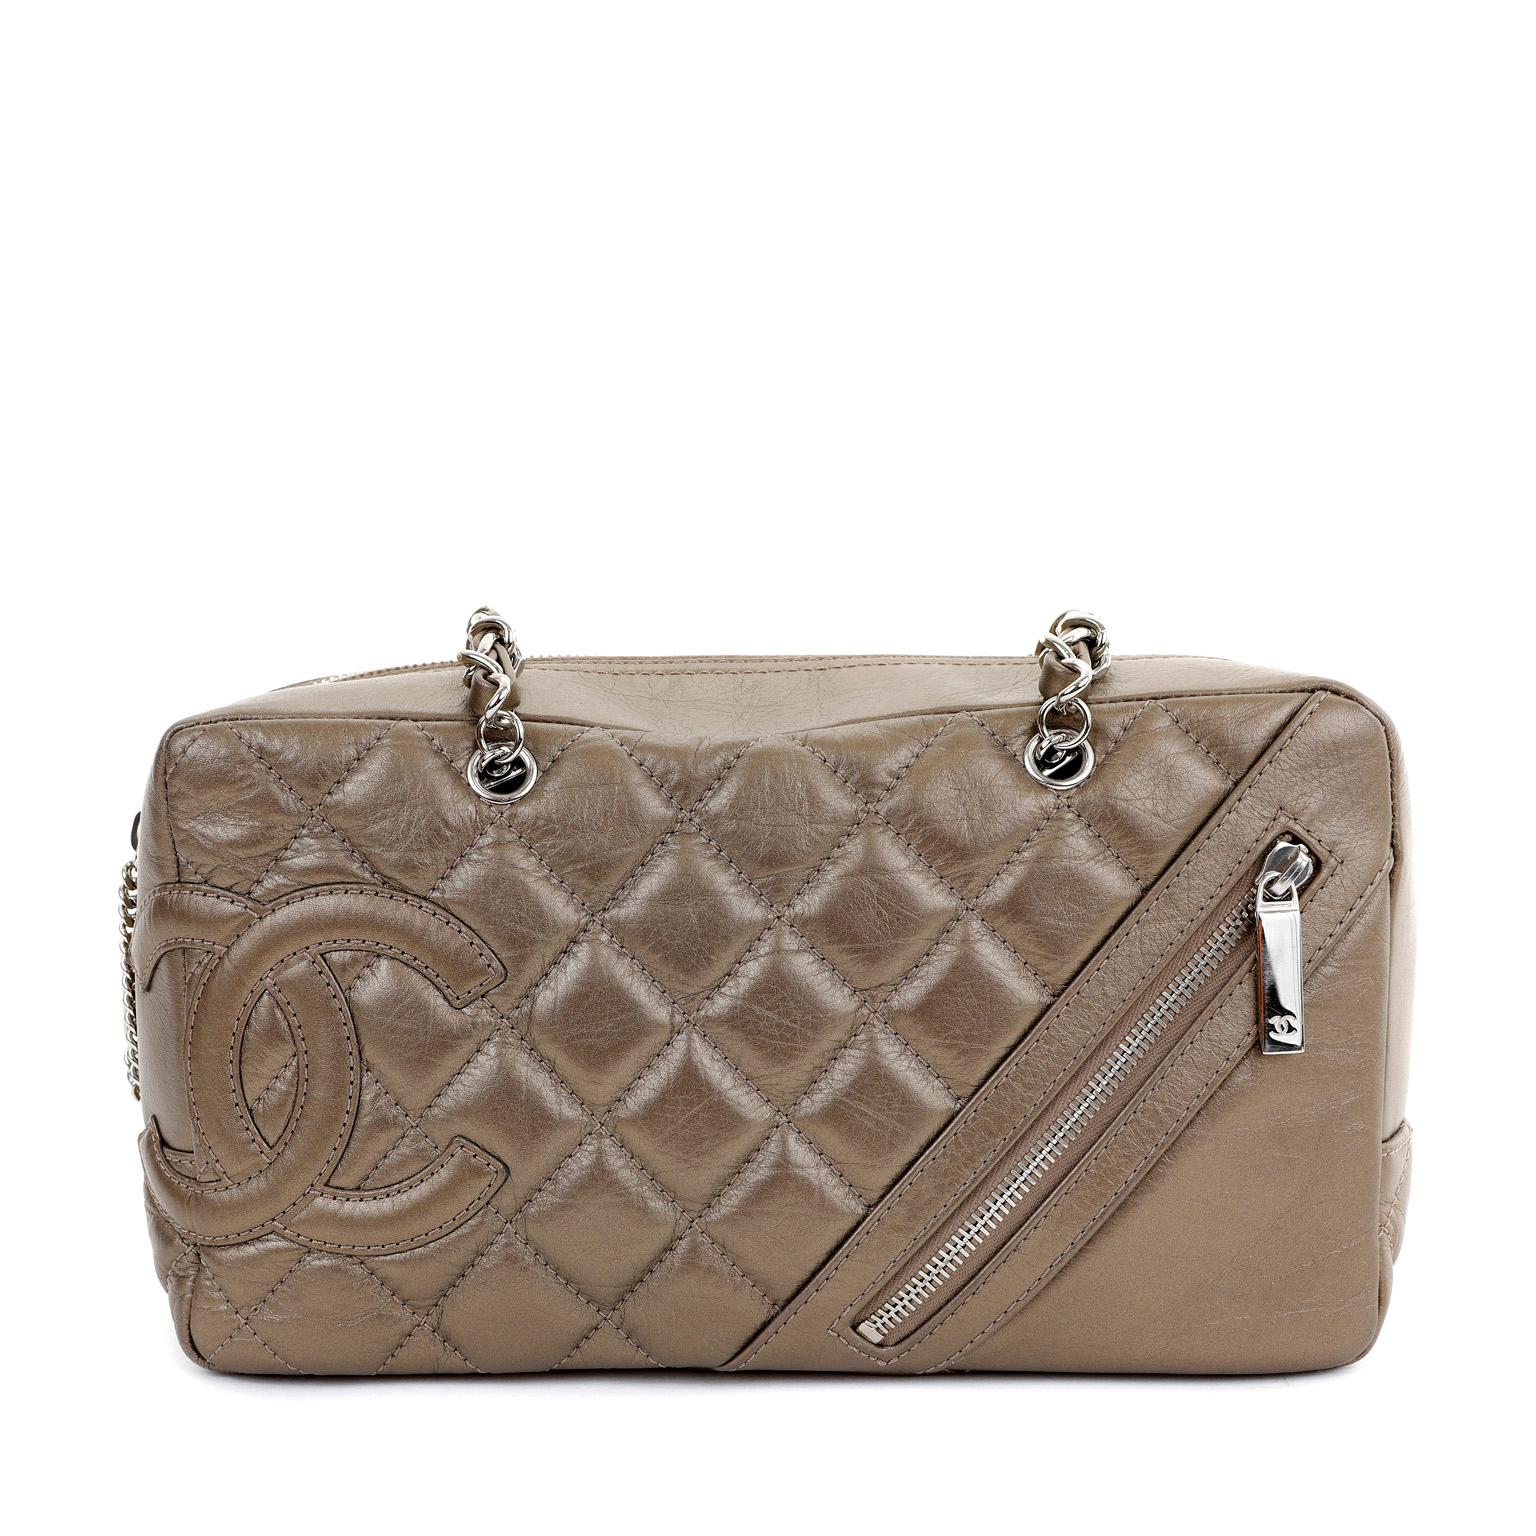 This authentic Chanel Bronze Lambskin Cambon Camera Bag is in excellent condition.  Intentionally distressed metallic bronze lambskin is quilted in signature Chanel diamond pattern.  Large interlocking CC is tonally stitched off to the side with a